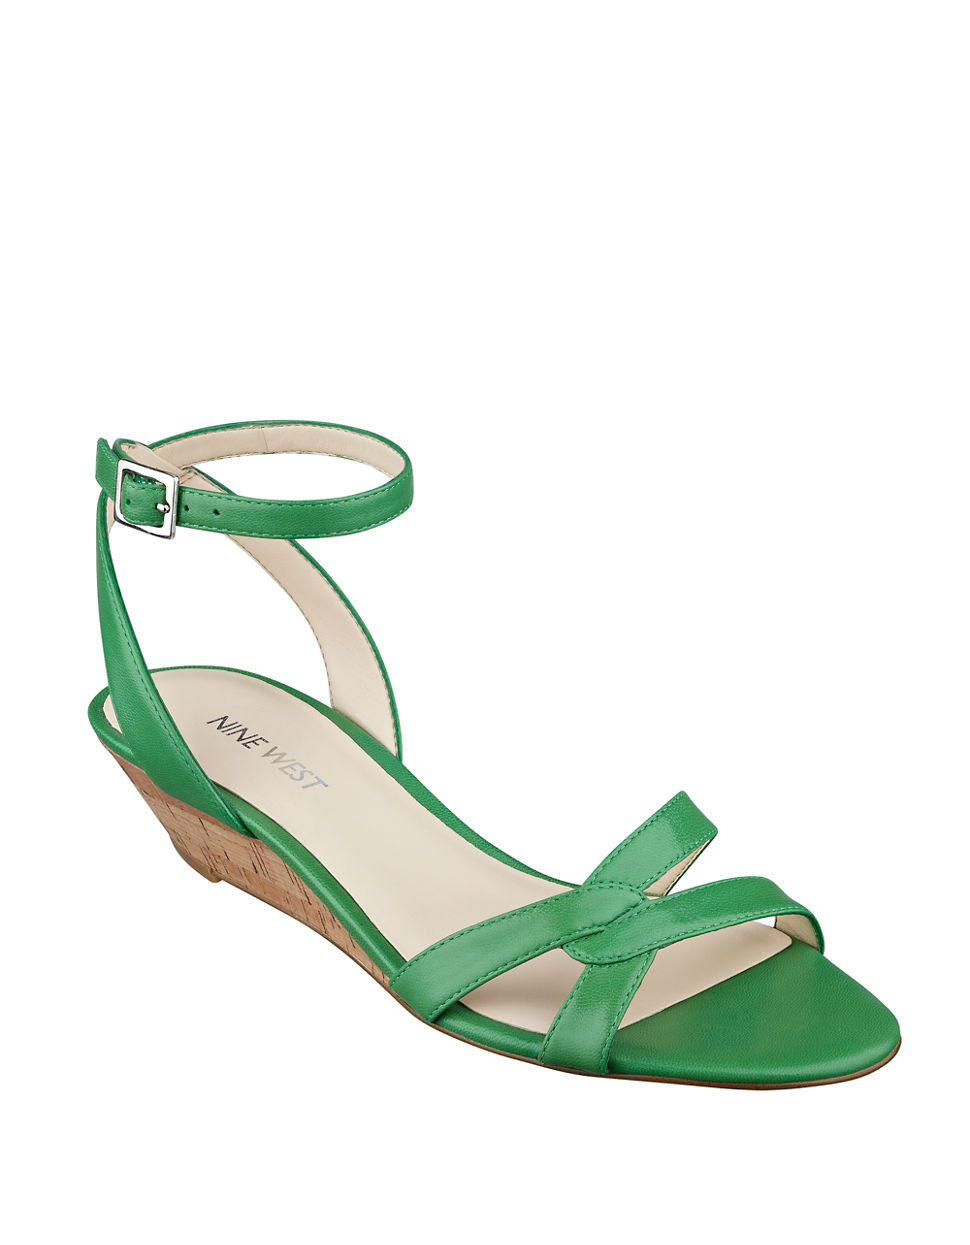 Nine West Valaria Leather Wedge Sandals in Green | Lyst